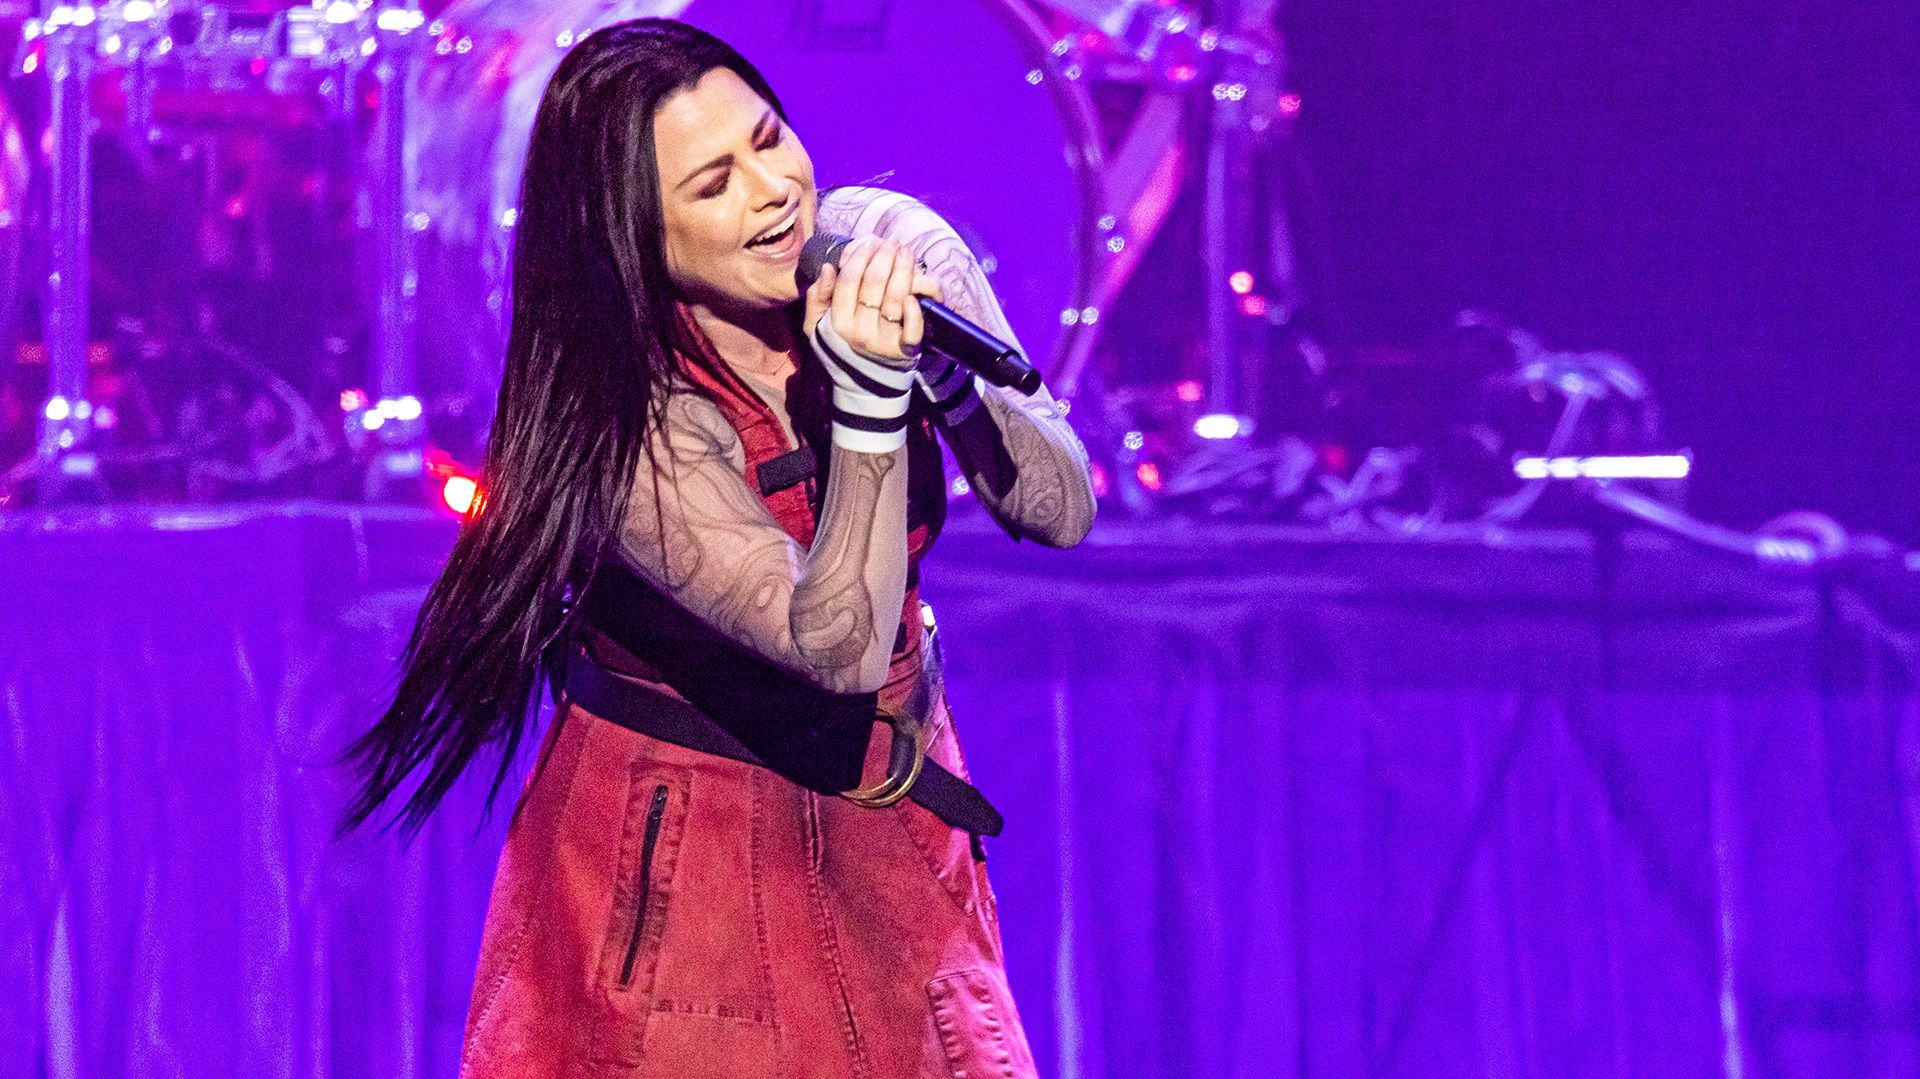 Amy Lee shares the best song for introducing someone to Evanescence | Music  - Kerrang! Radio